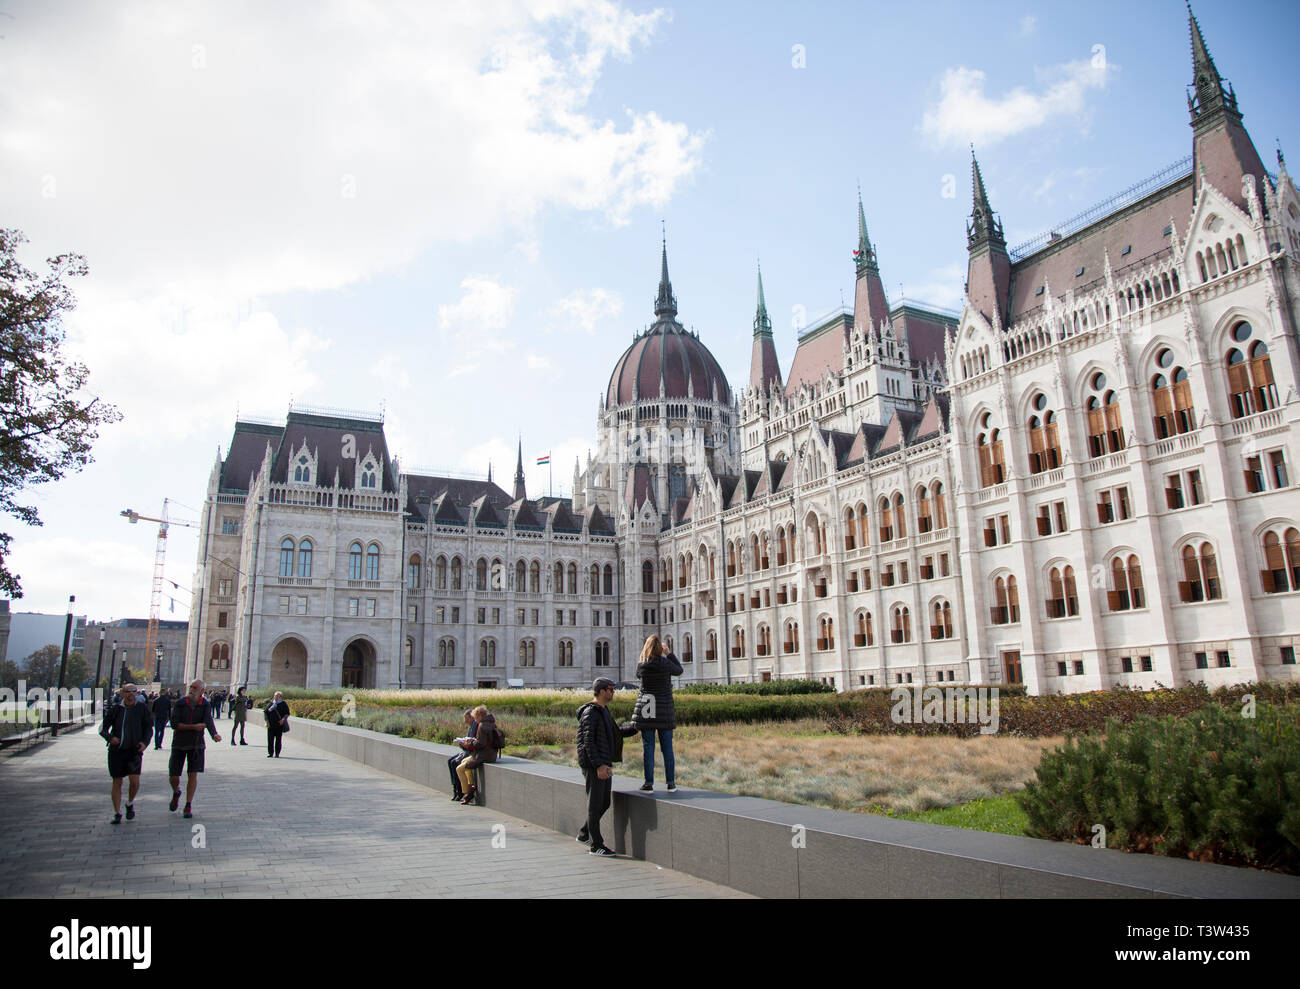 The Hungarian Parliament Building, also known as the Parliament of Budapest after its location, is the seat of the National Assembly of Hungary, a not Stock Photo